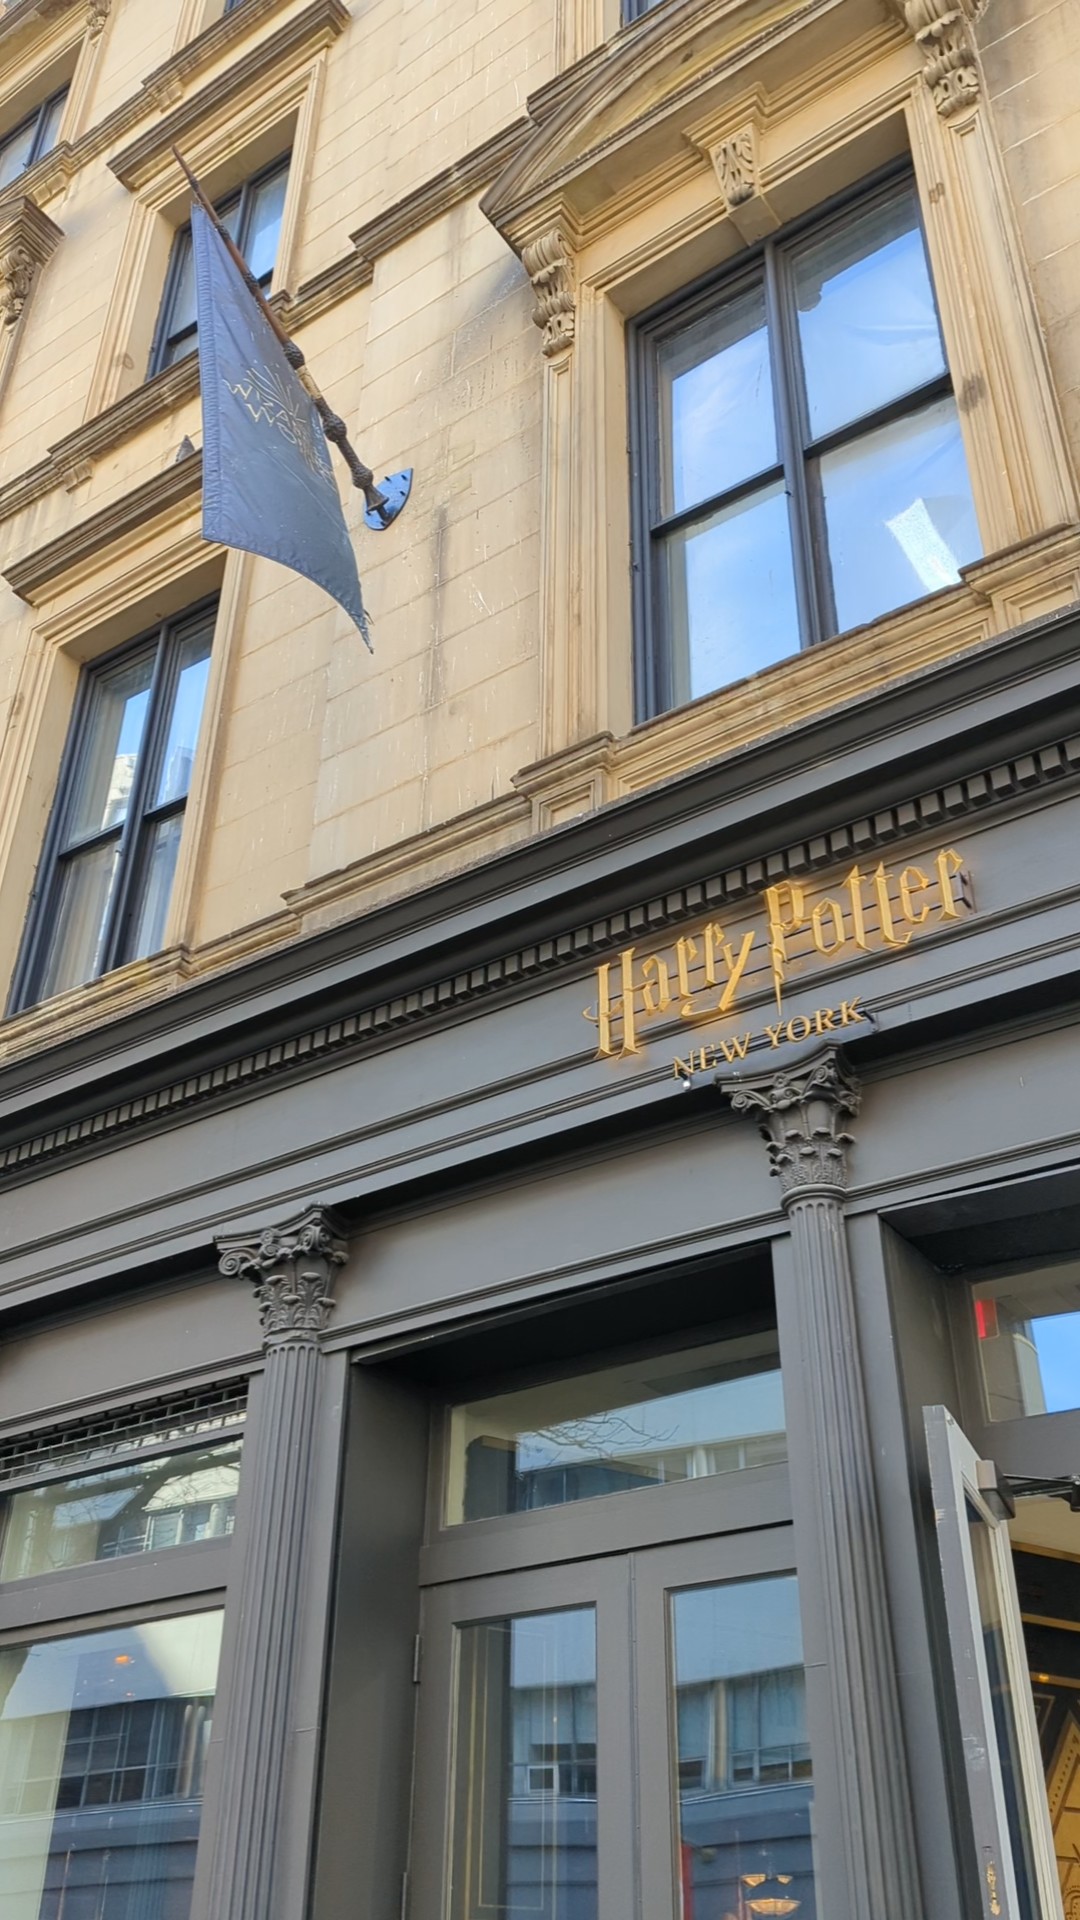 Things to Buy at the Harry Potter Store at Broadway, NYC